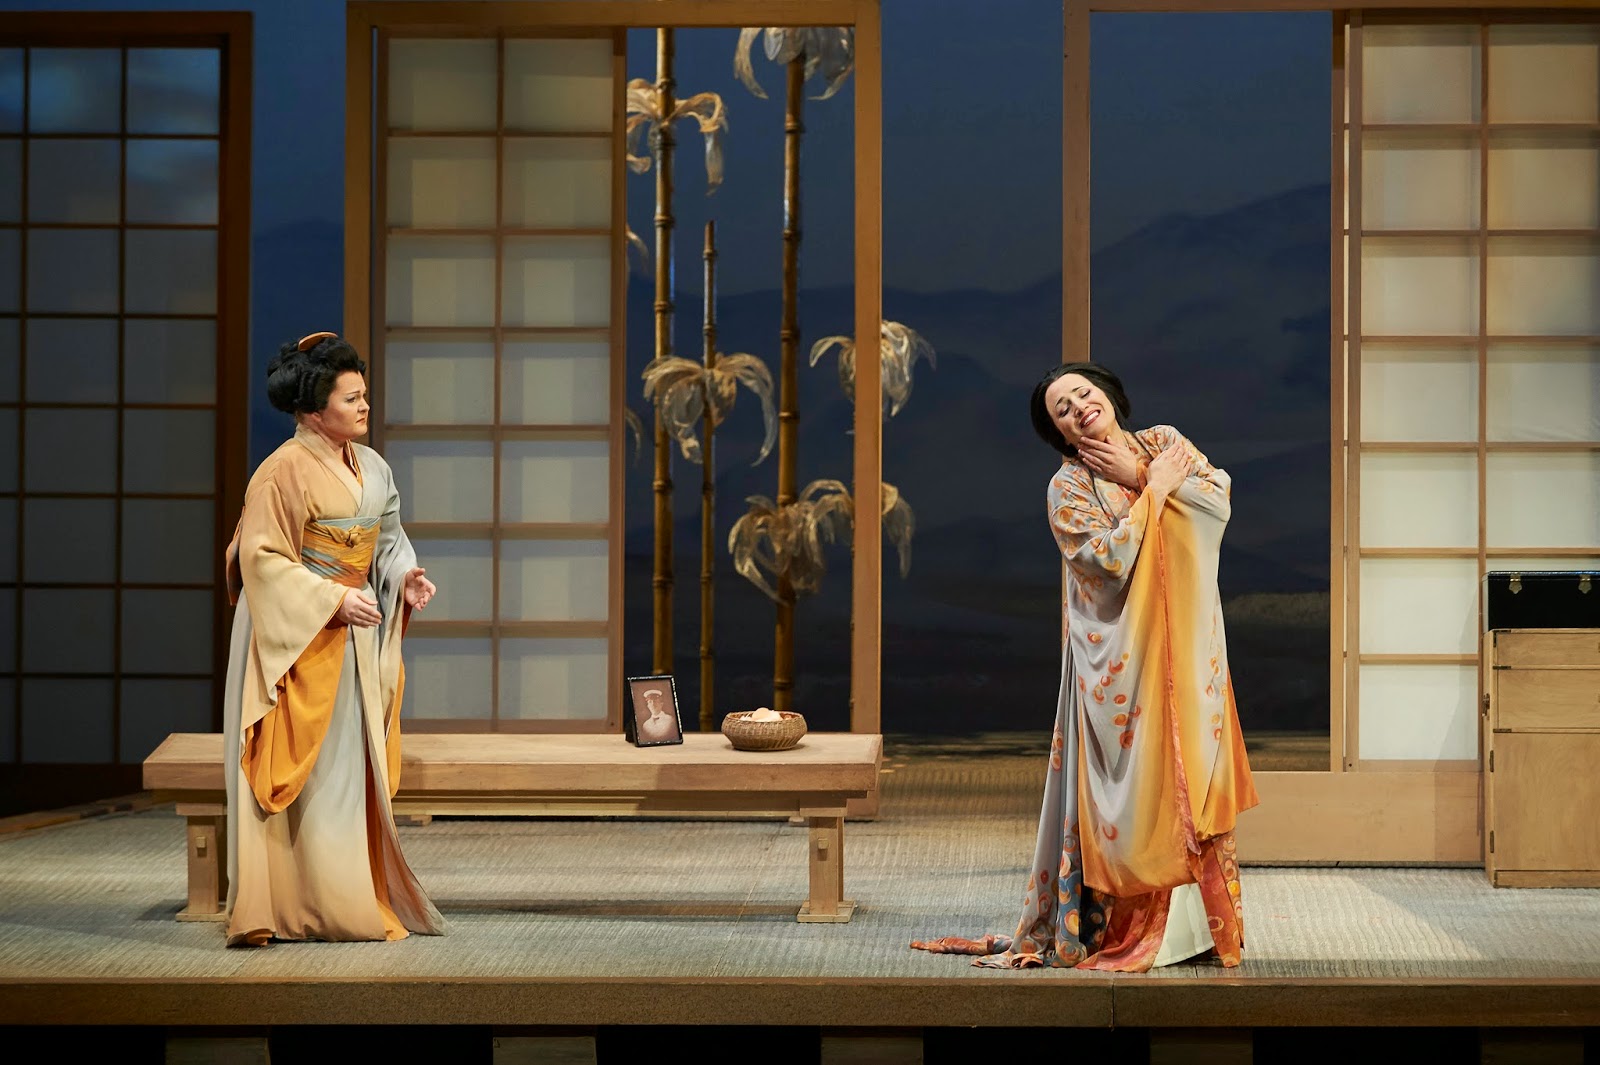 Madama butterfly - review of coc production.